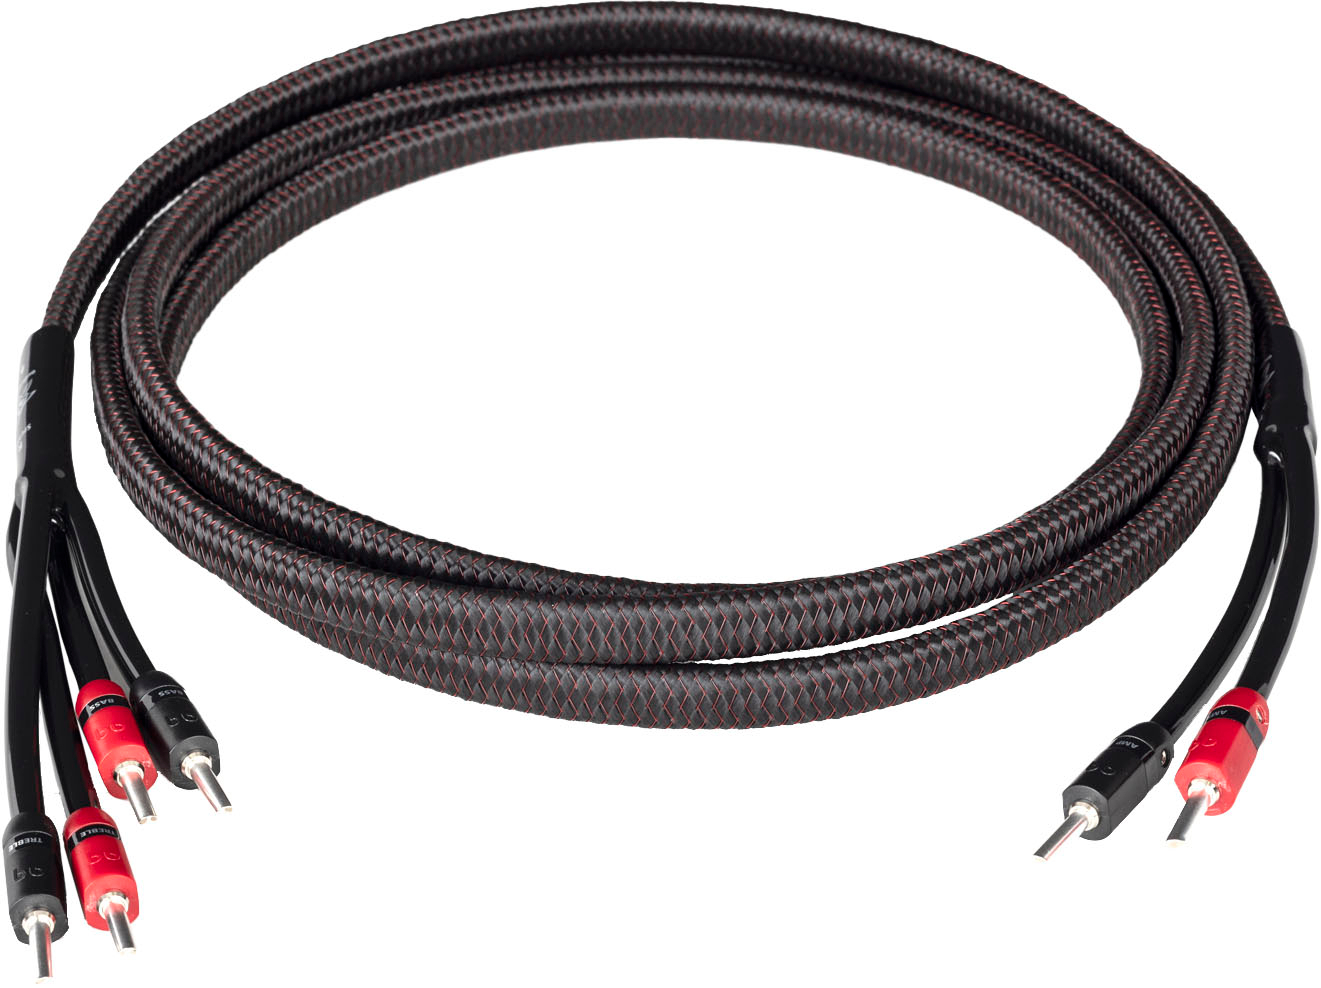 Angle View: AudioQuest - Rocket 33 10' Pair Bi-Wire Speaker Cable, Silver Banana Connectors - Red/Black